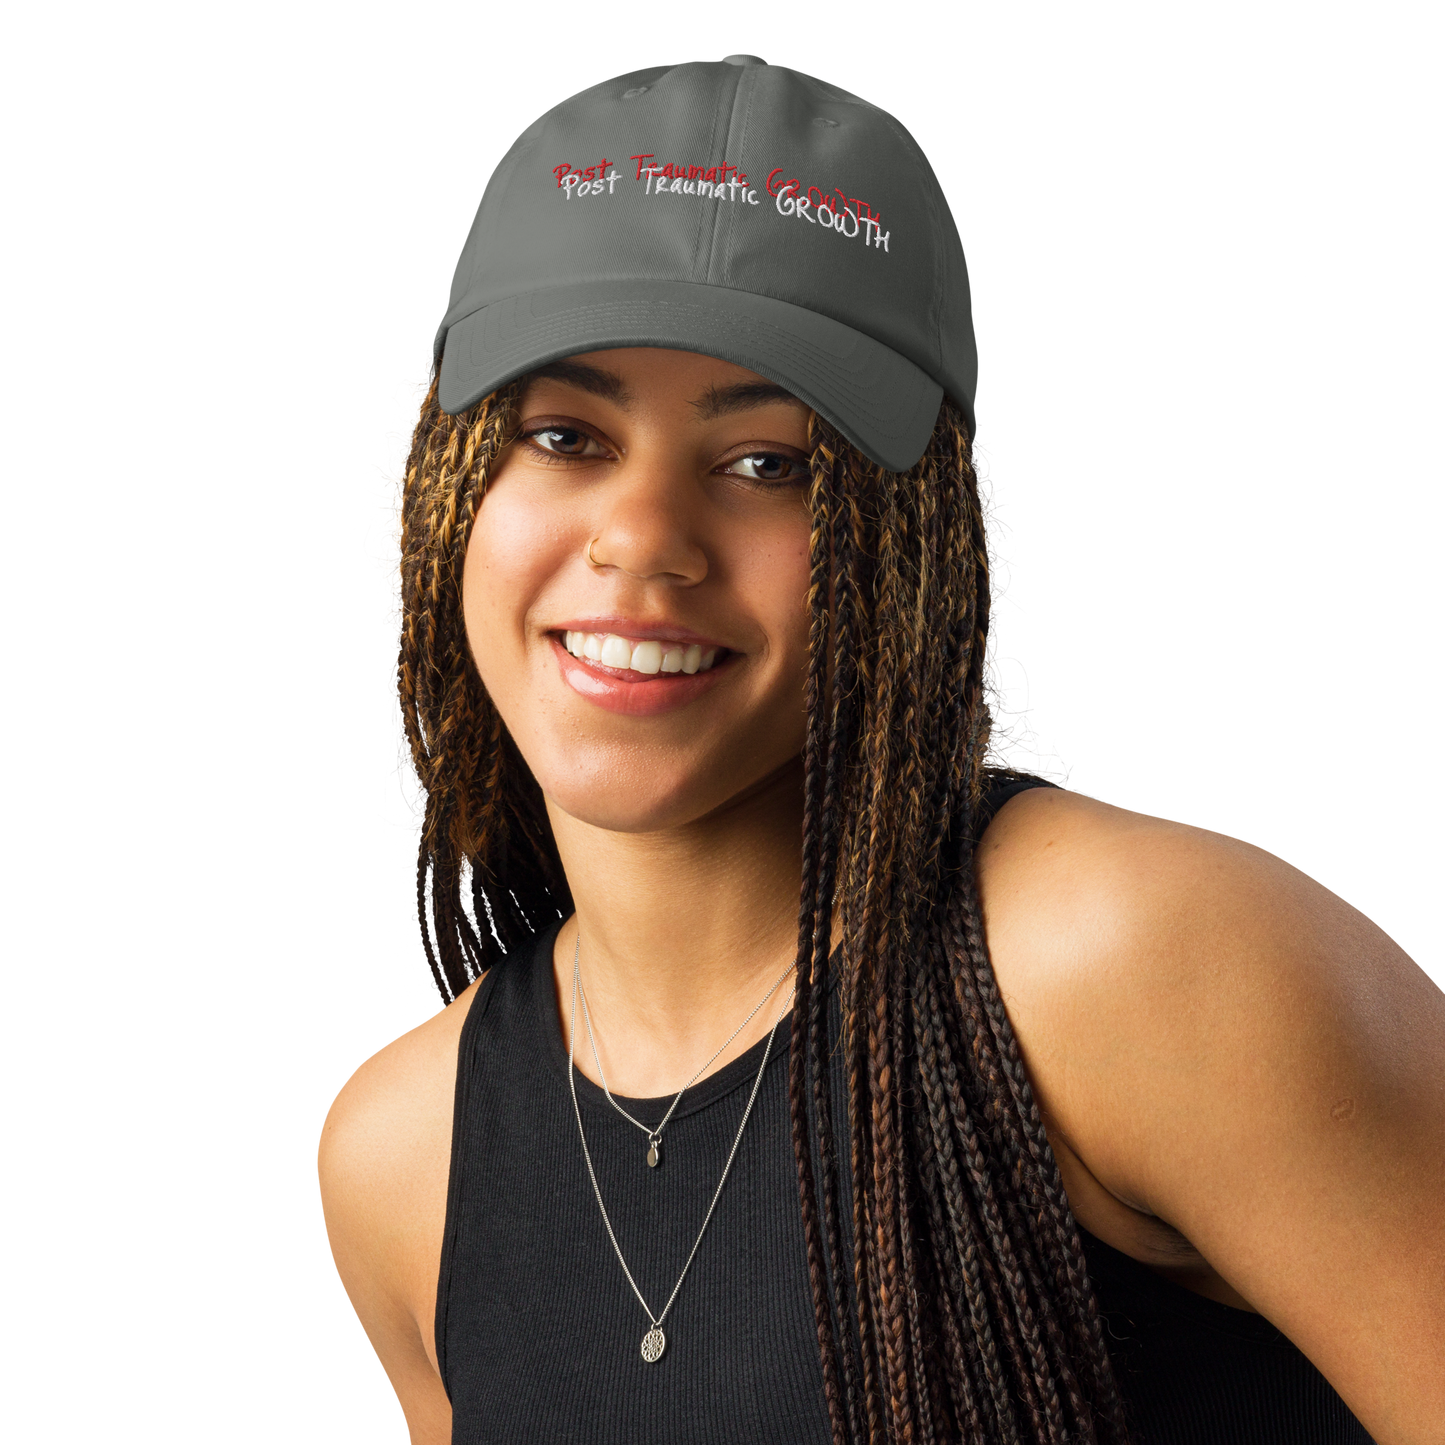 Under Armour® Post Traumatic Growth dad hat